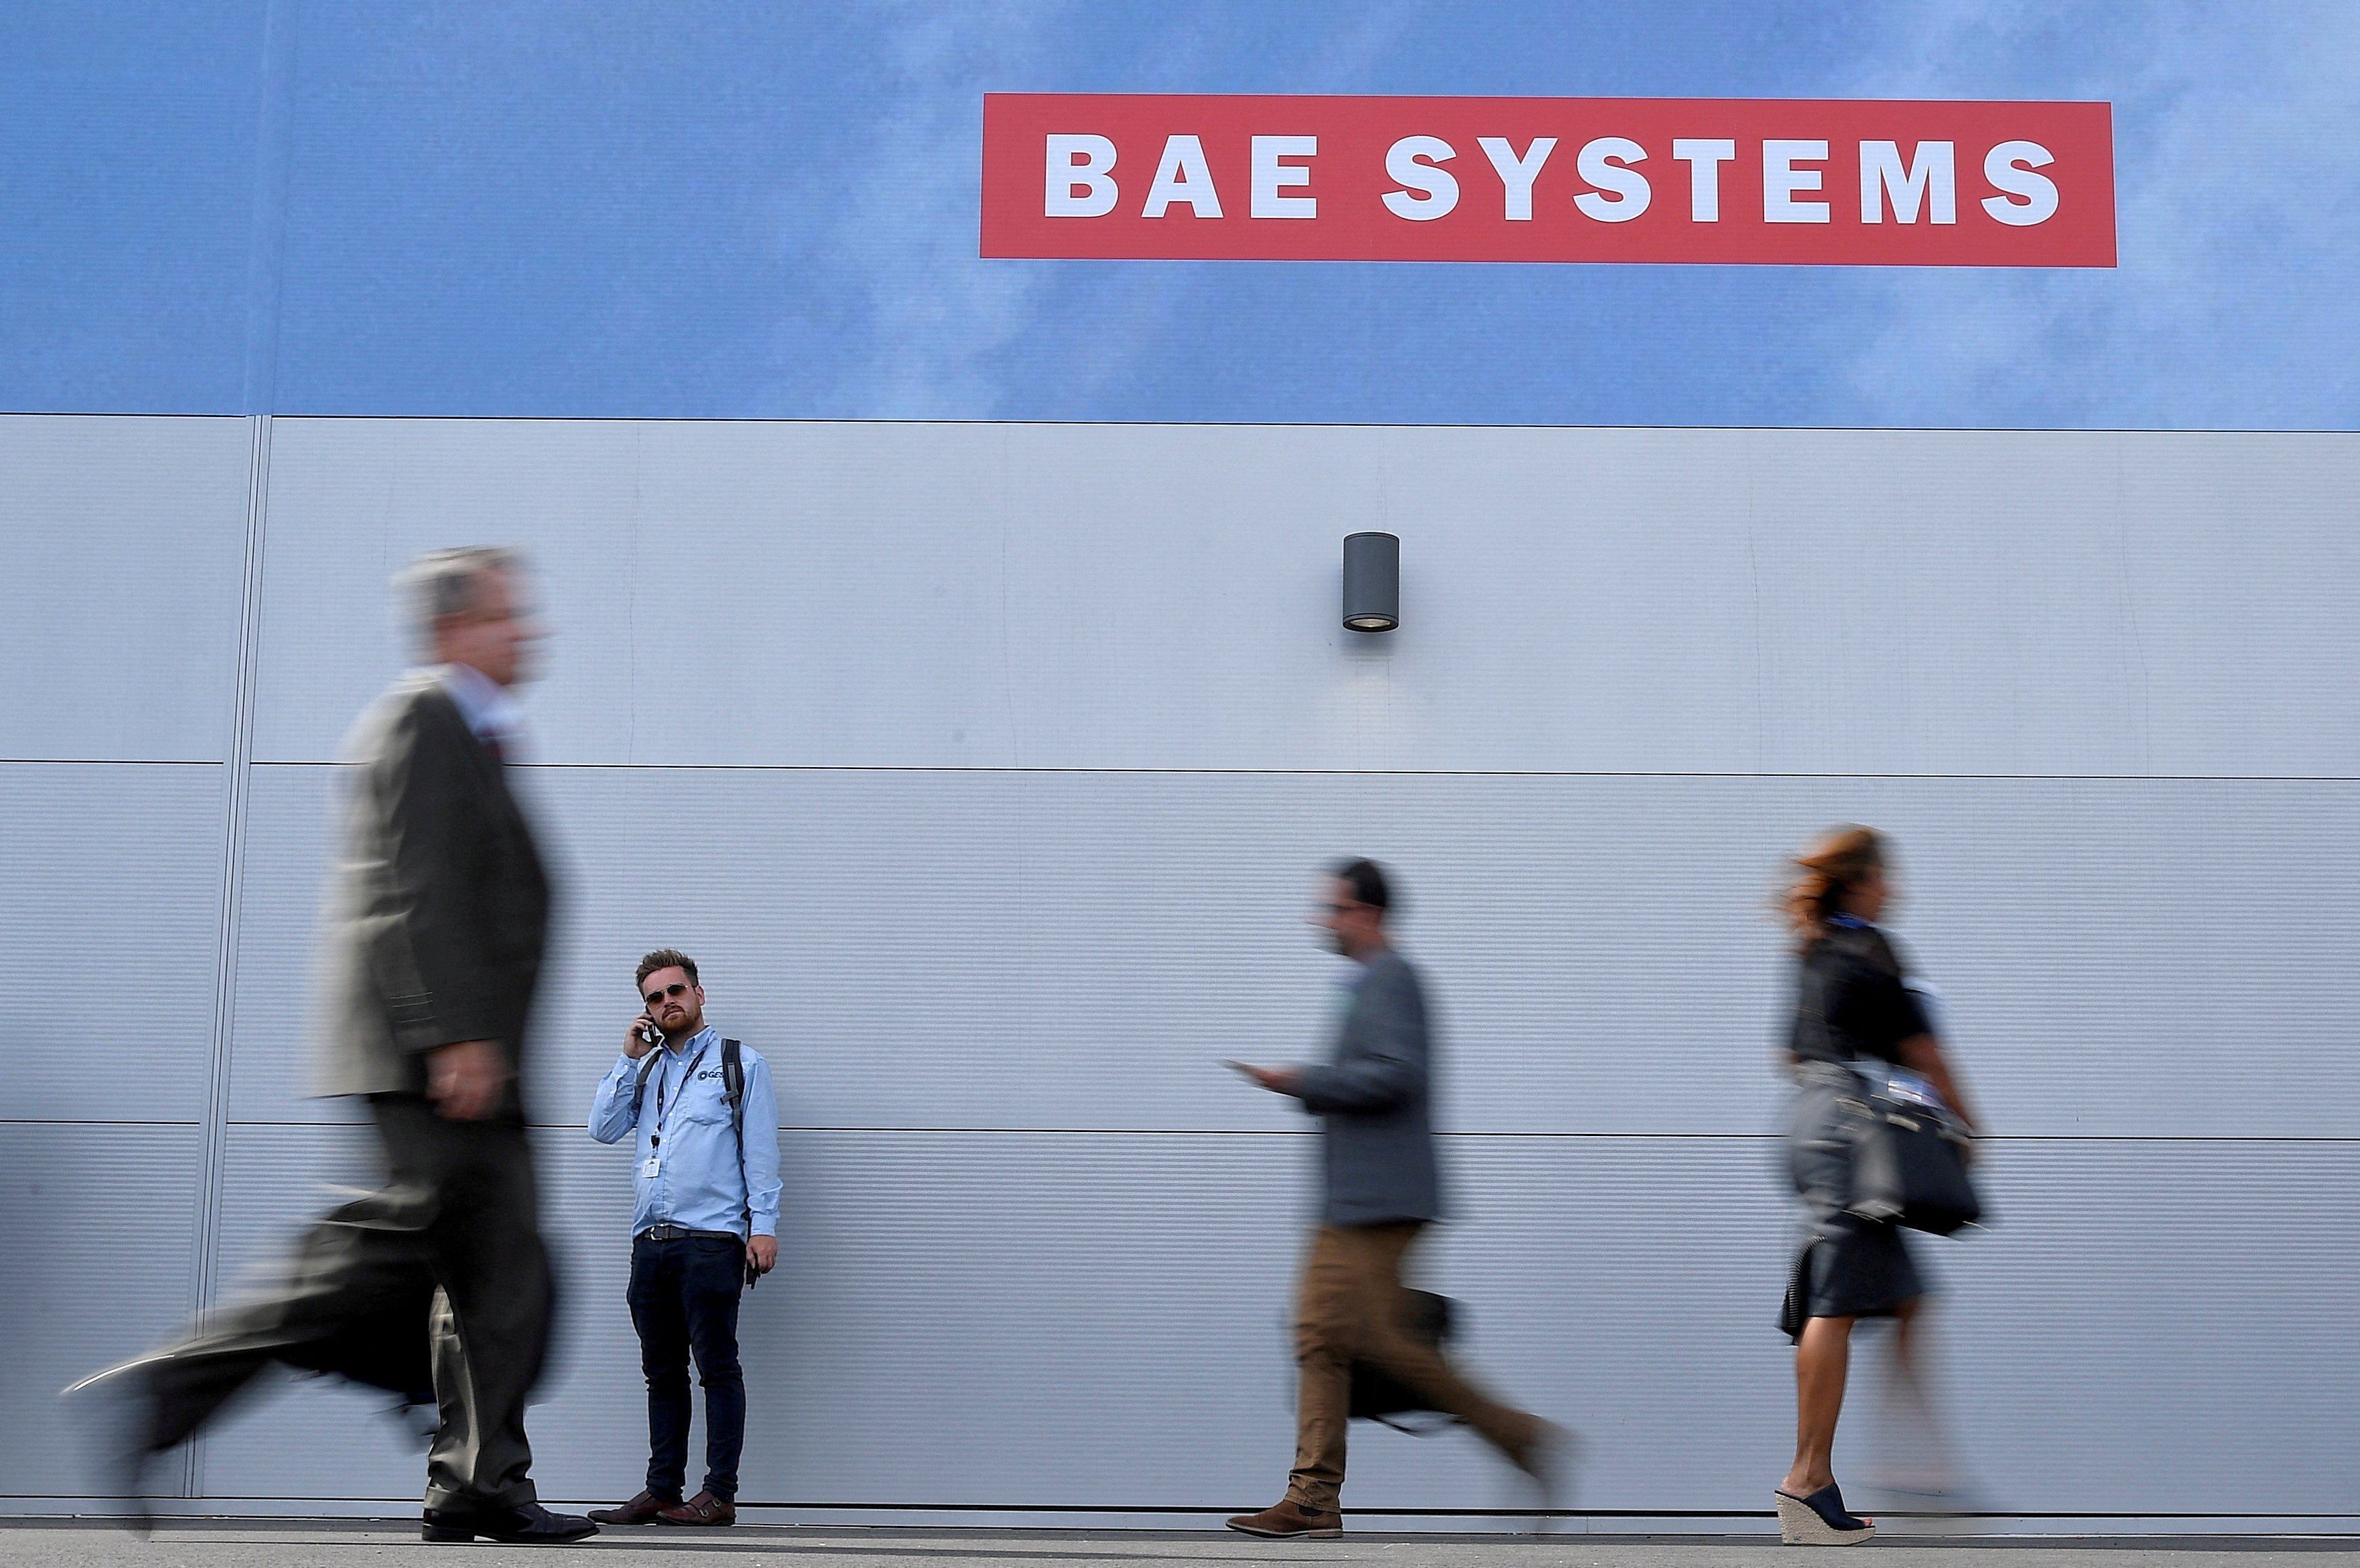 A poster for BAE Systems, which the UK has awarded a US$4.9 billion contract as part of the Aukus programme. Photo: Reuters